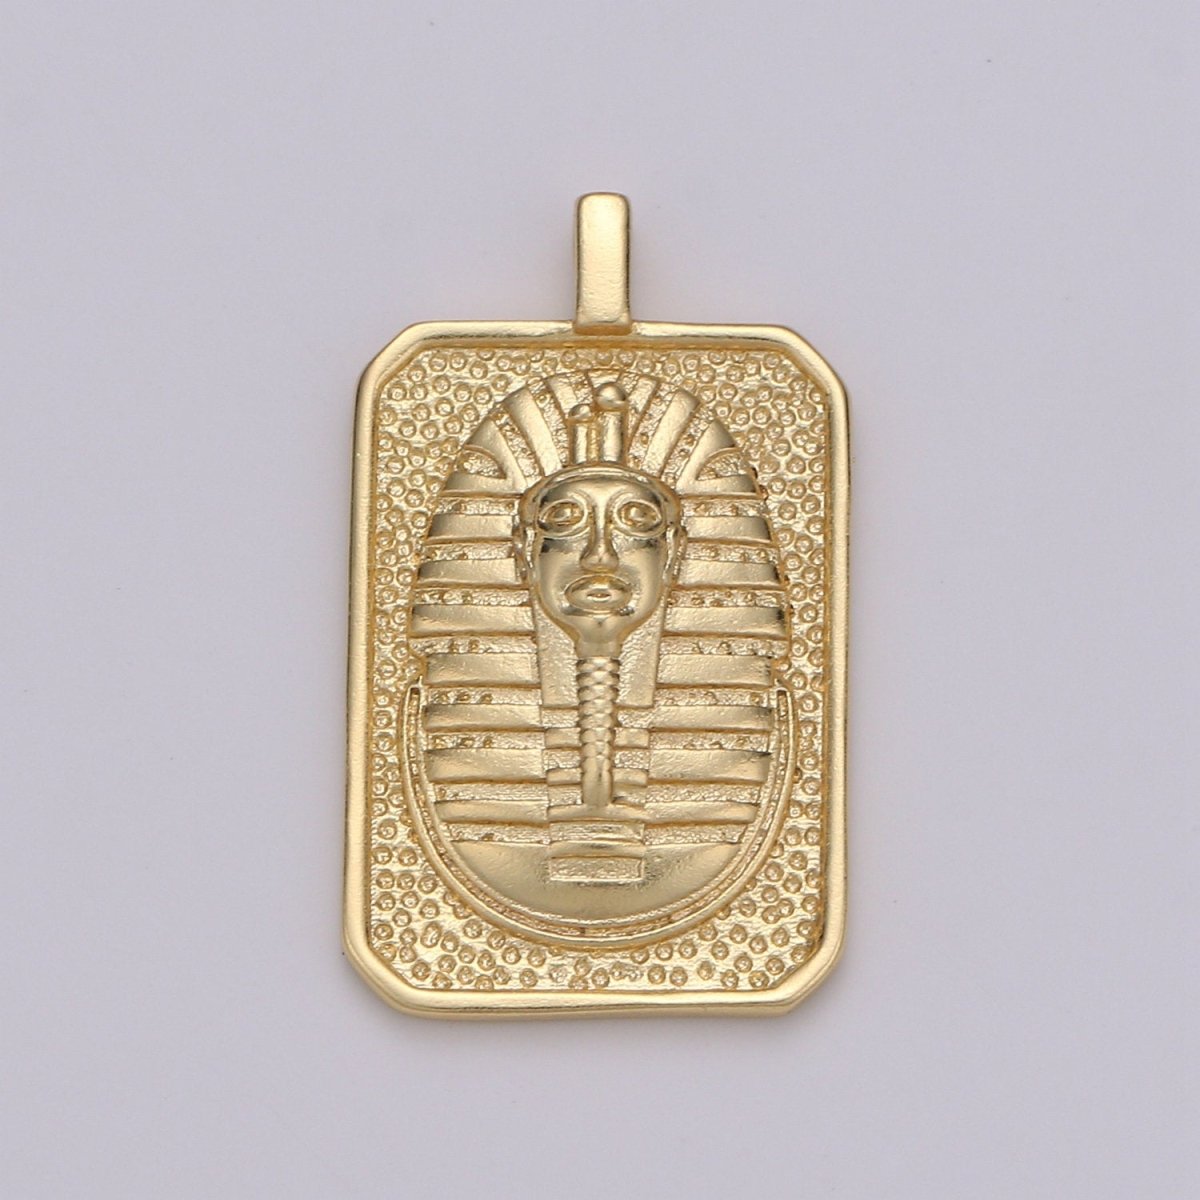 Gold Tag Pharaoh Charm Gold Filled Medallion, Egyptian Mummy Sarcophagus Pendant Necklace Charm for Necklace Component Men Unisex Jewelry J-025 - DLUXCA